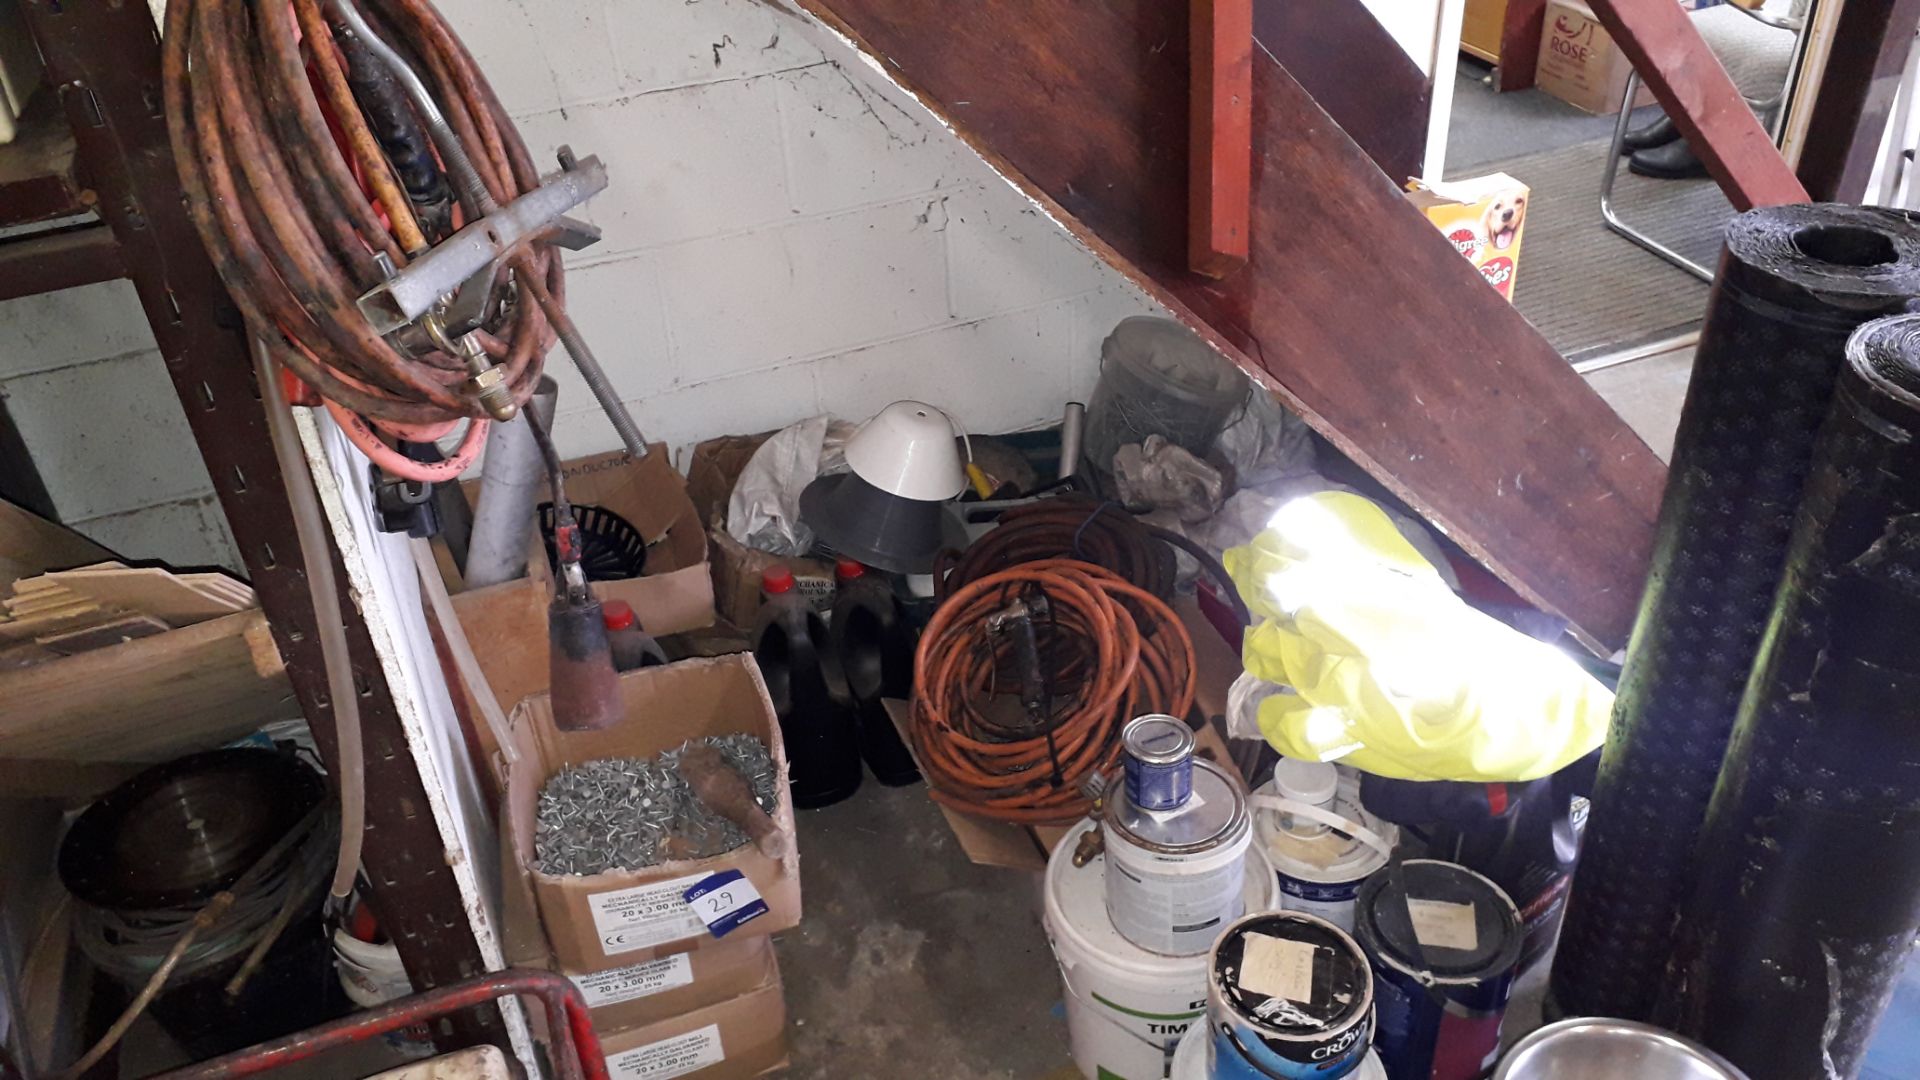 Contents of Under Staircase Storage to include Blow Torch Lines, Hoses, Oils, Nails, Consumables - Image 2 of 2